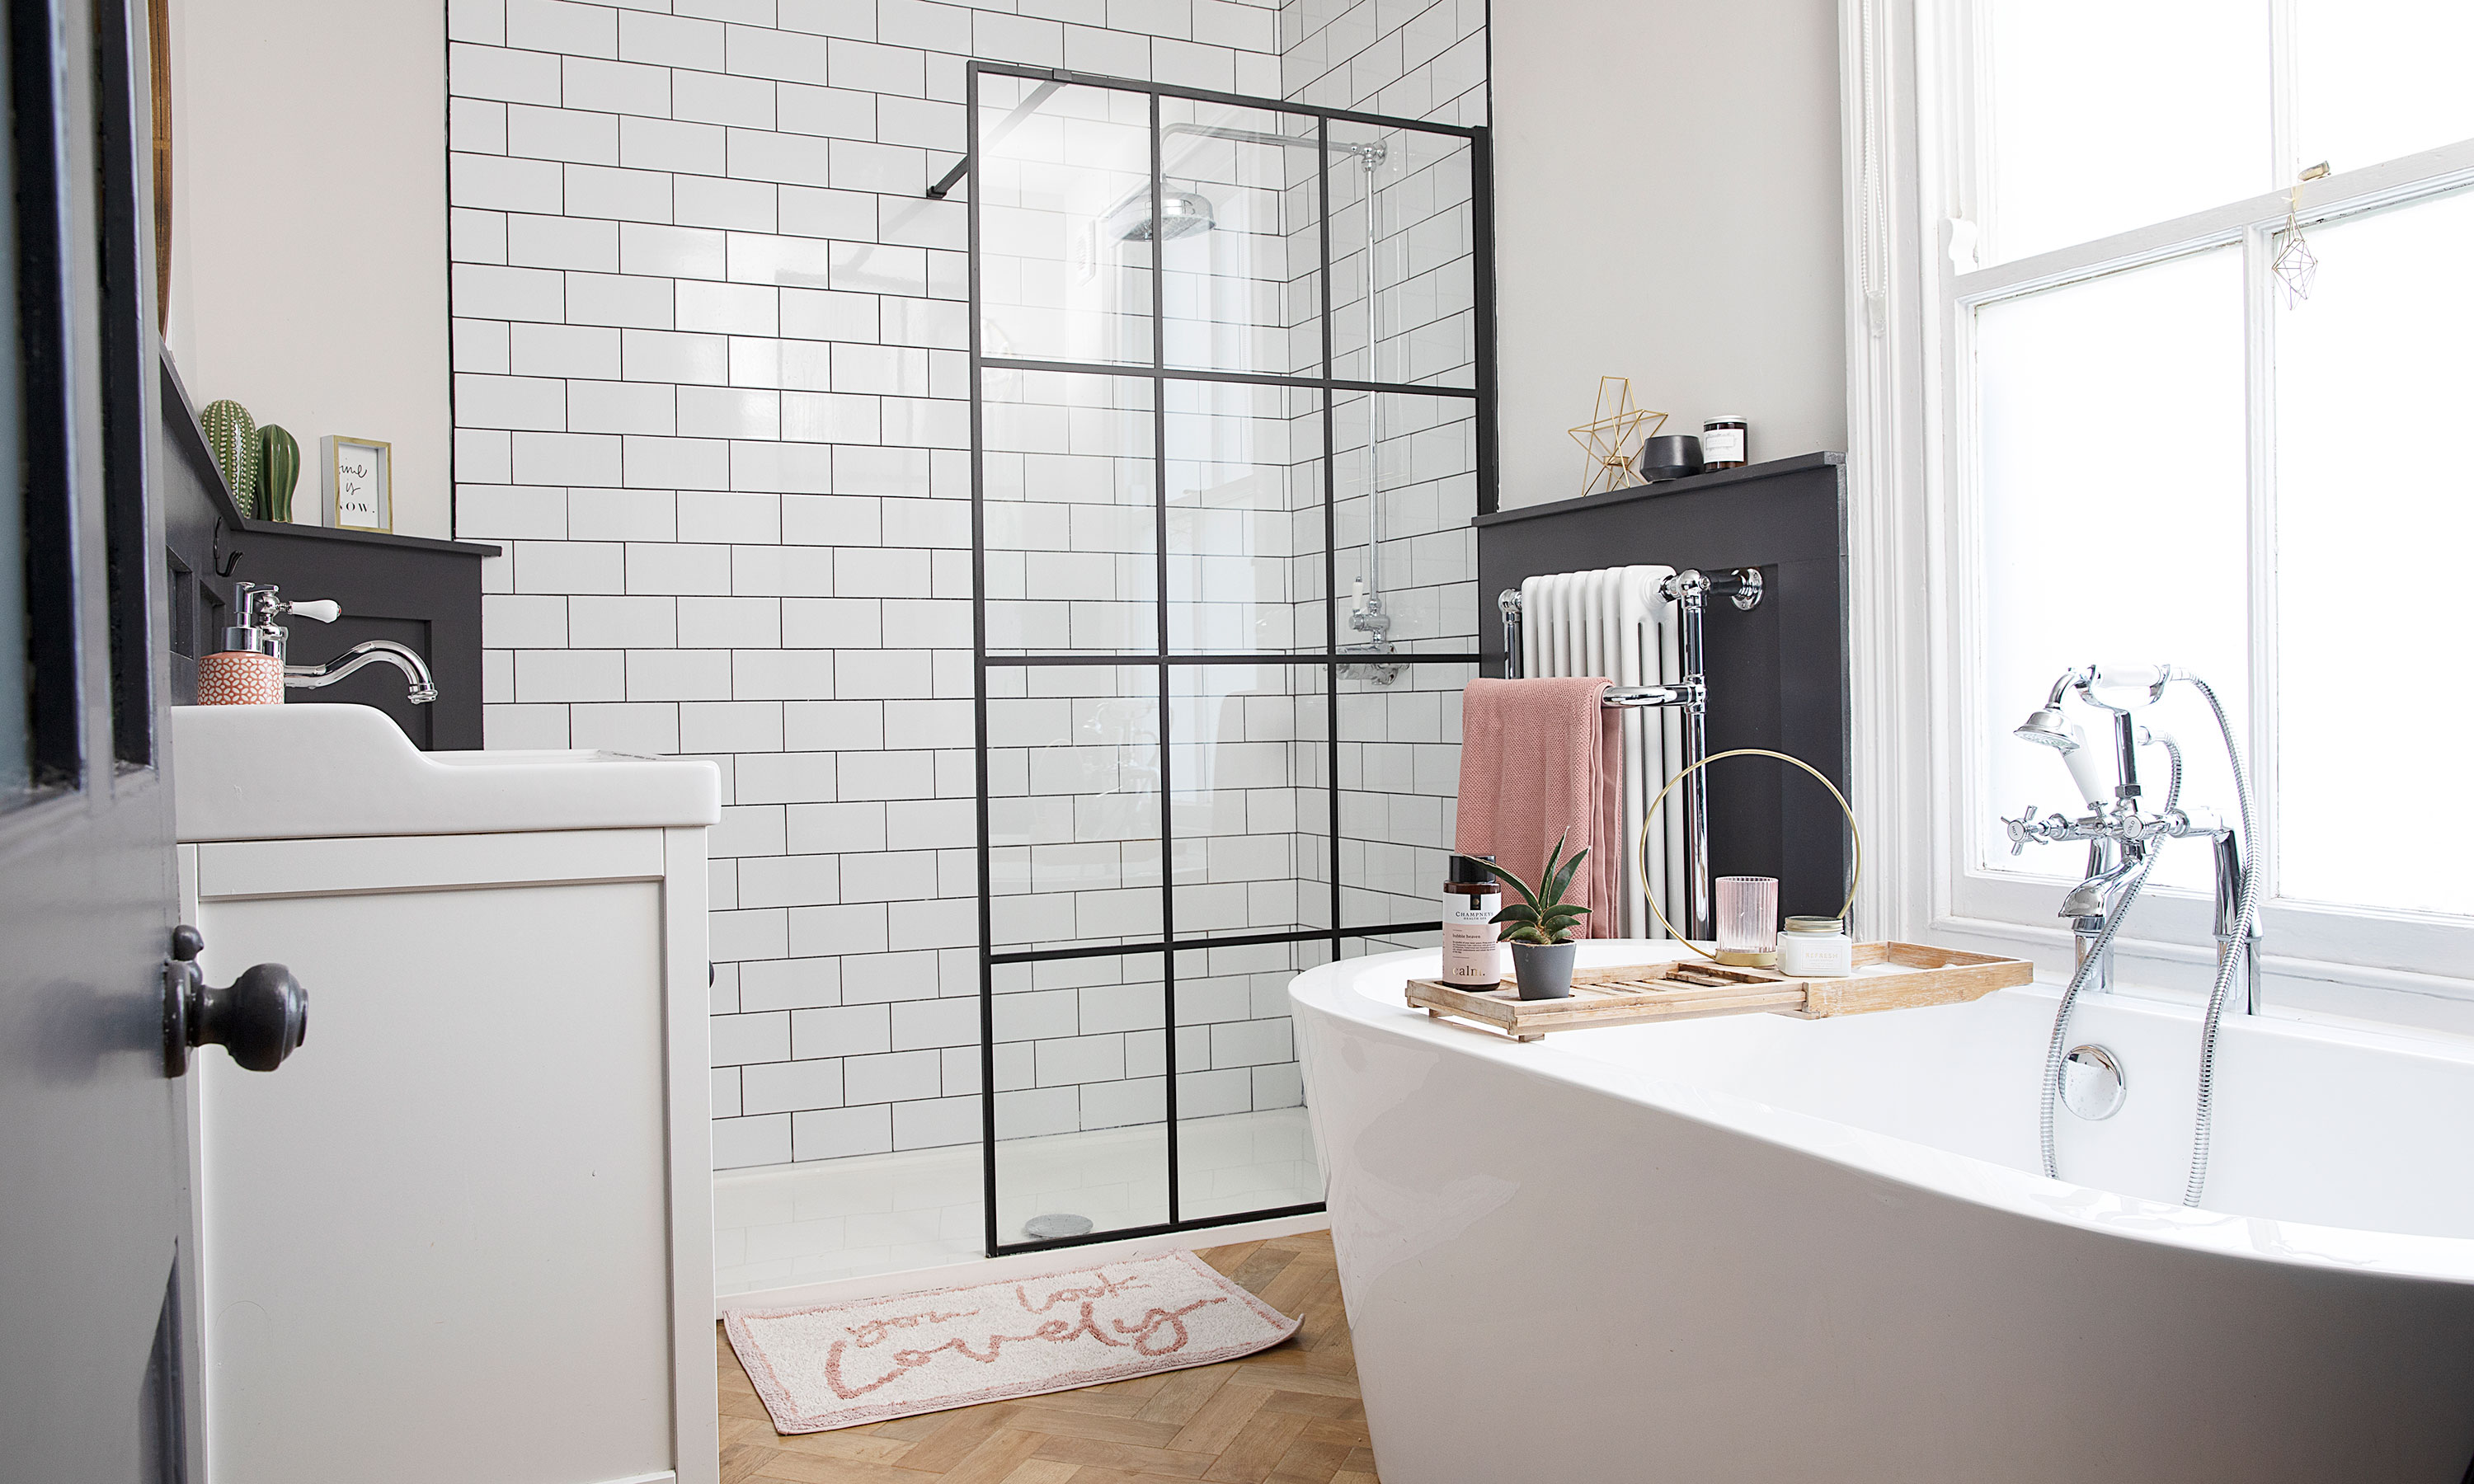 B&A: a modern bathroom makeover with Victorian elegance | Ideal Home